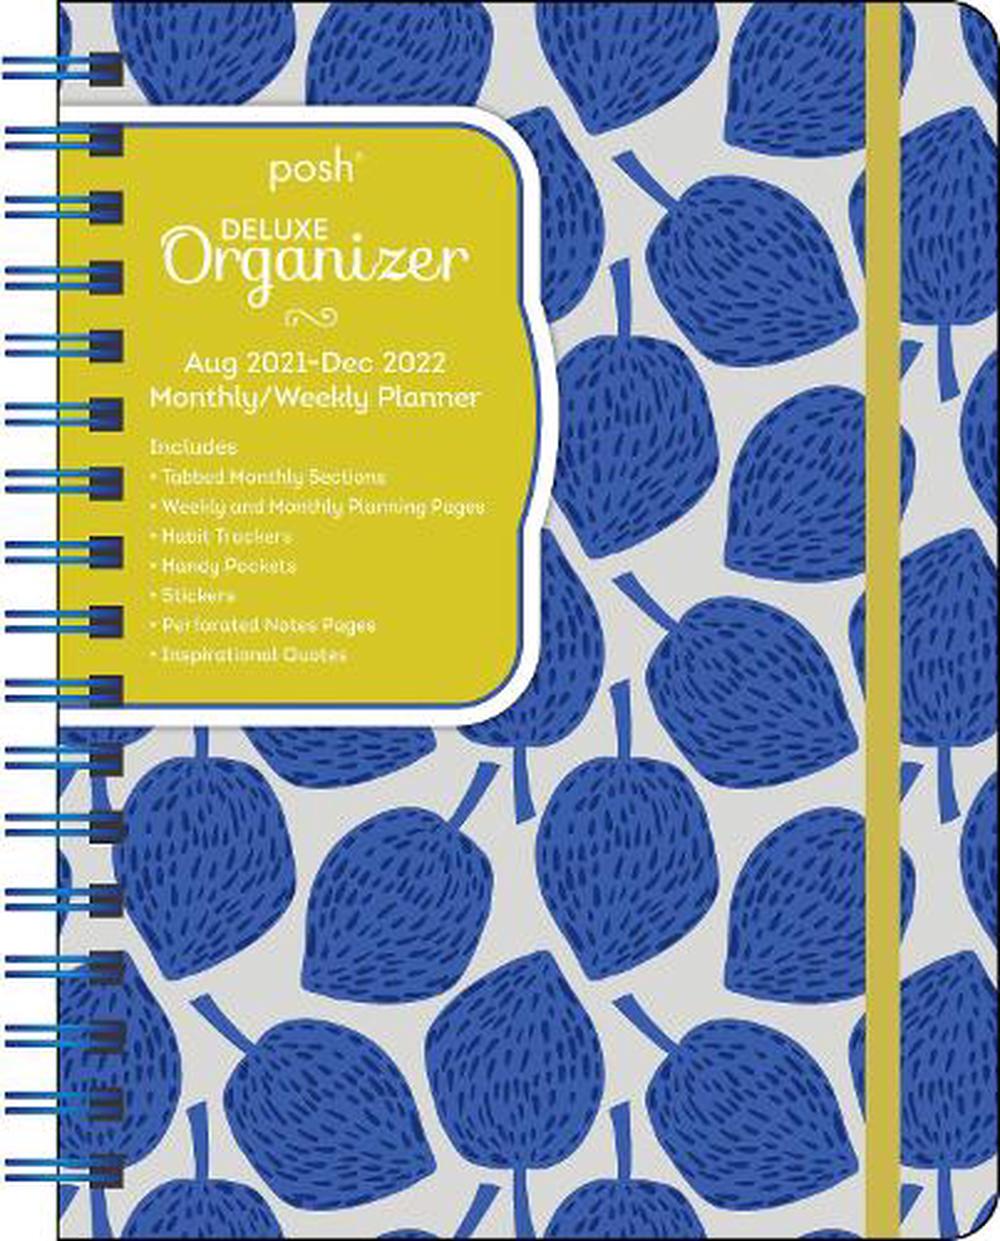 Posh Deluxe Organizer 17month 20212022 Monthly/weekly Planner